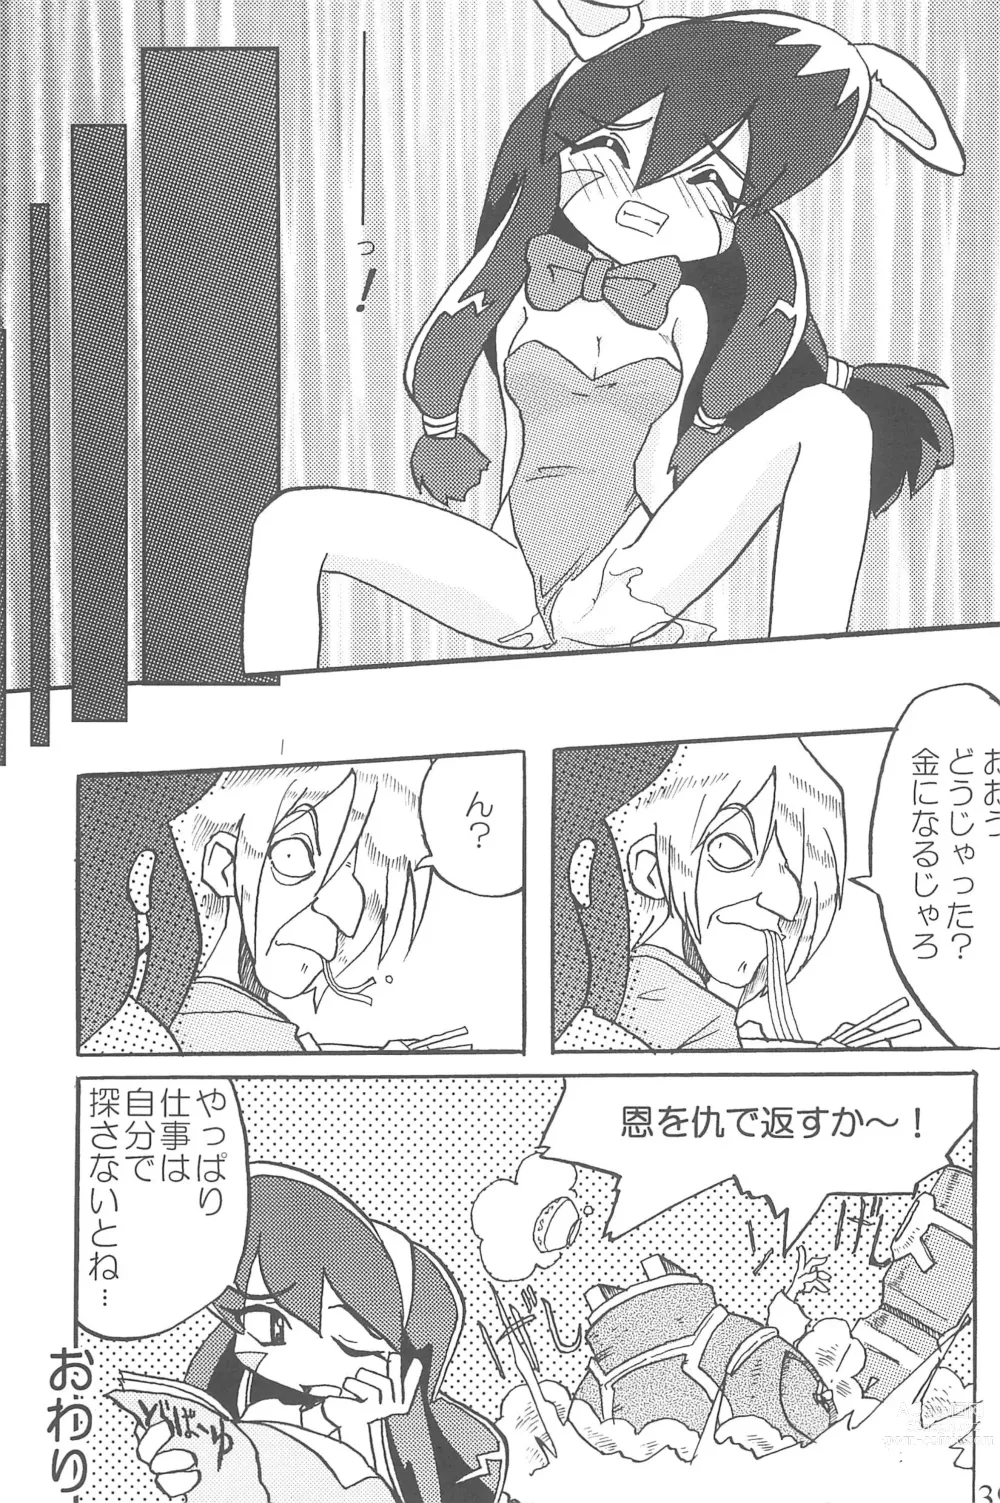 Page 39 of doujinshi Amuse-gueule